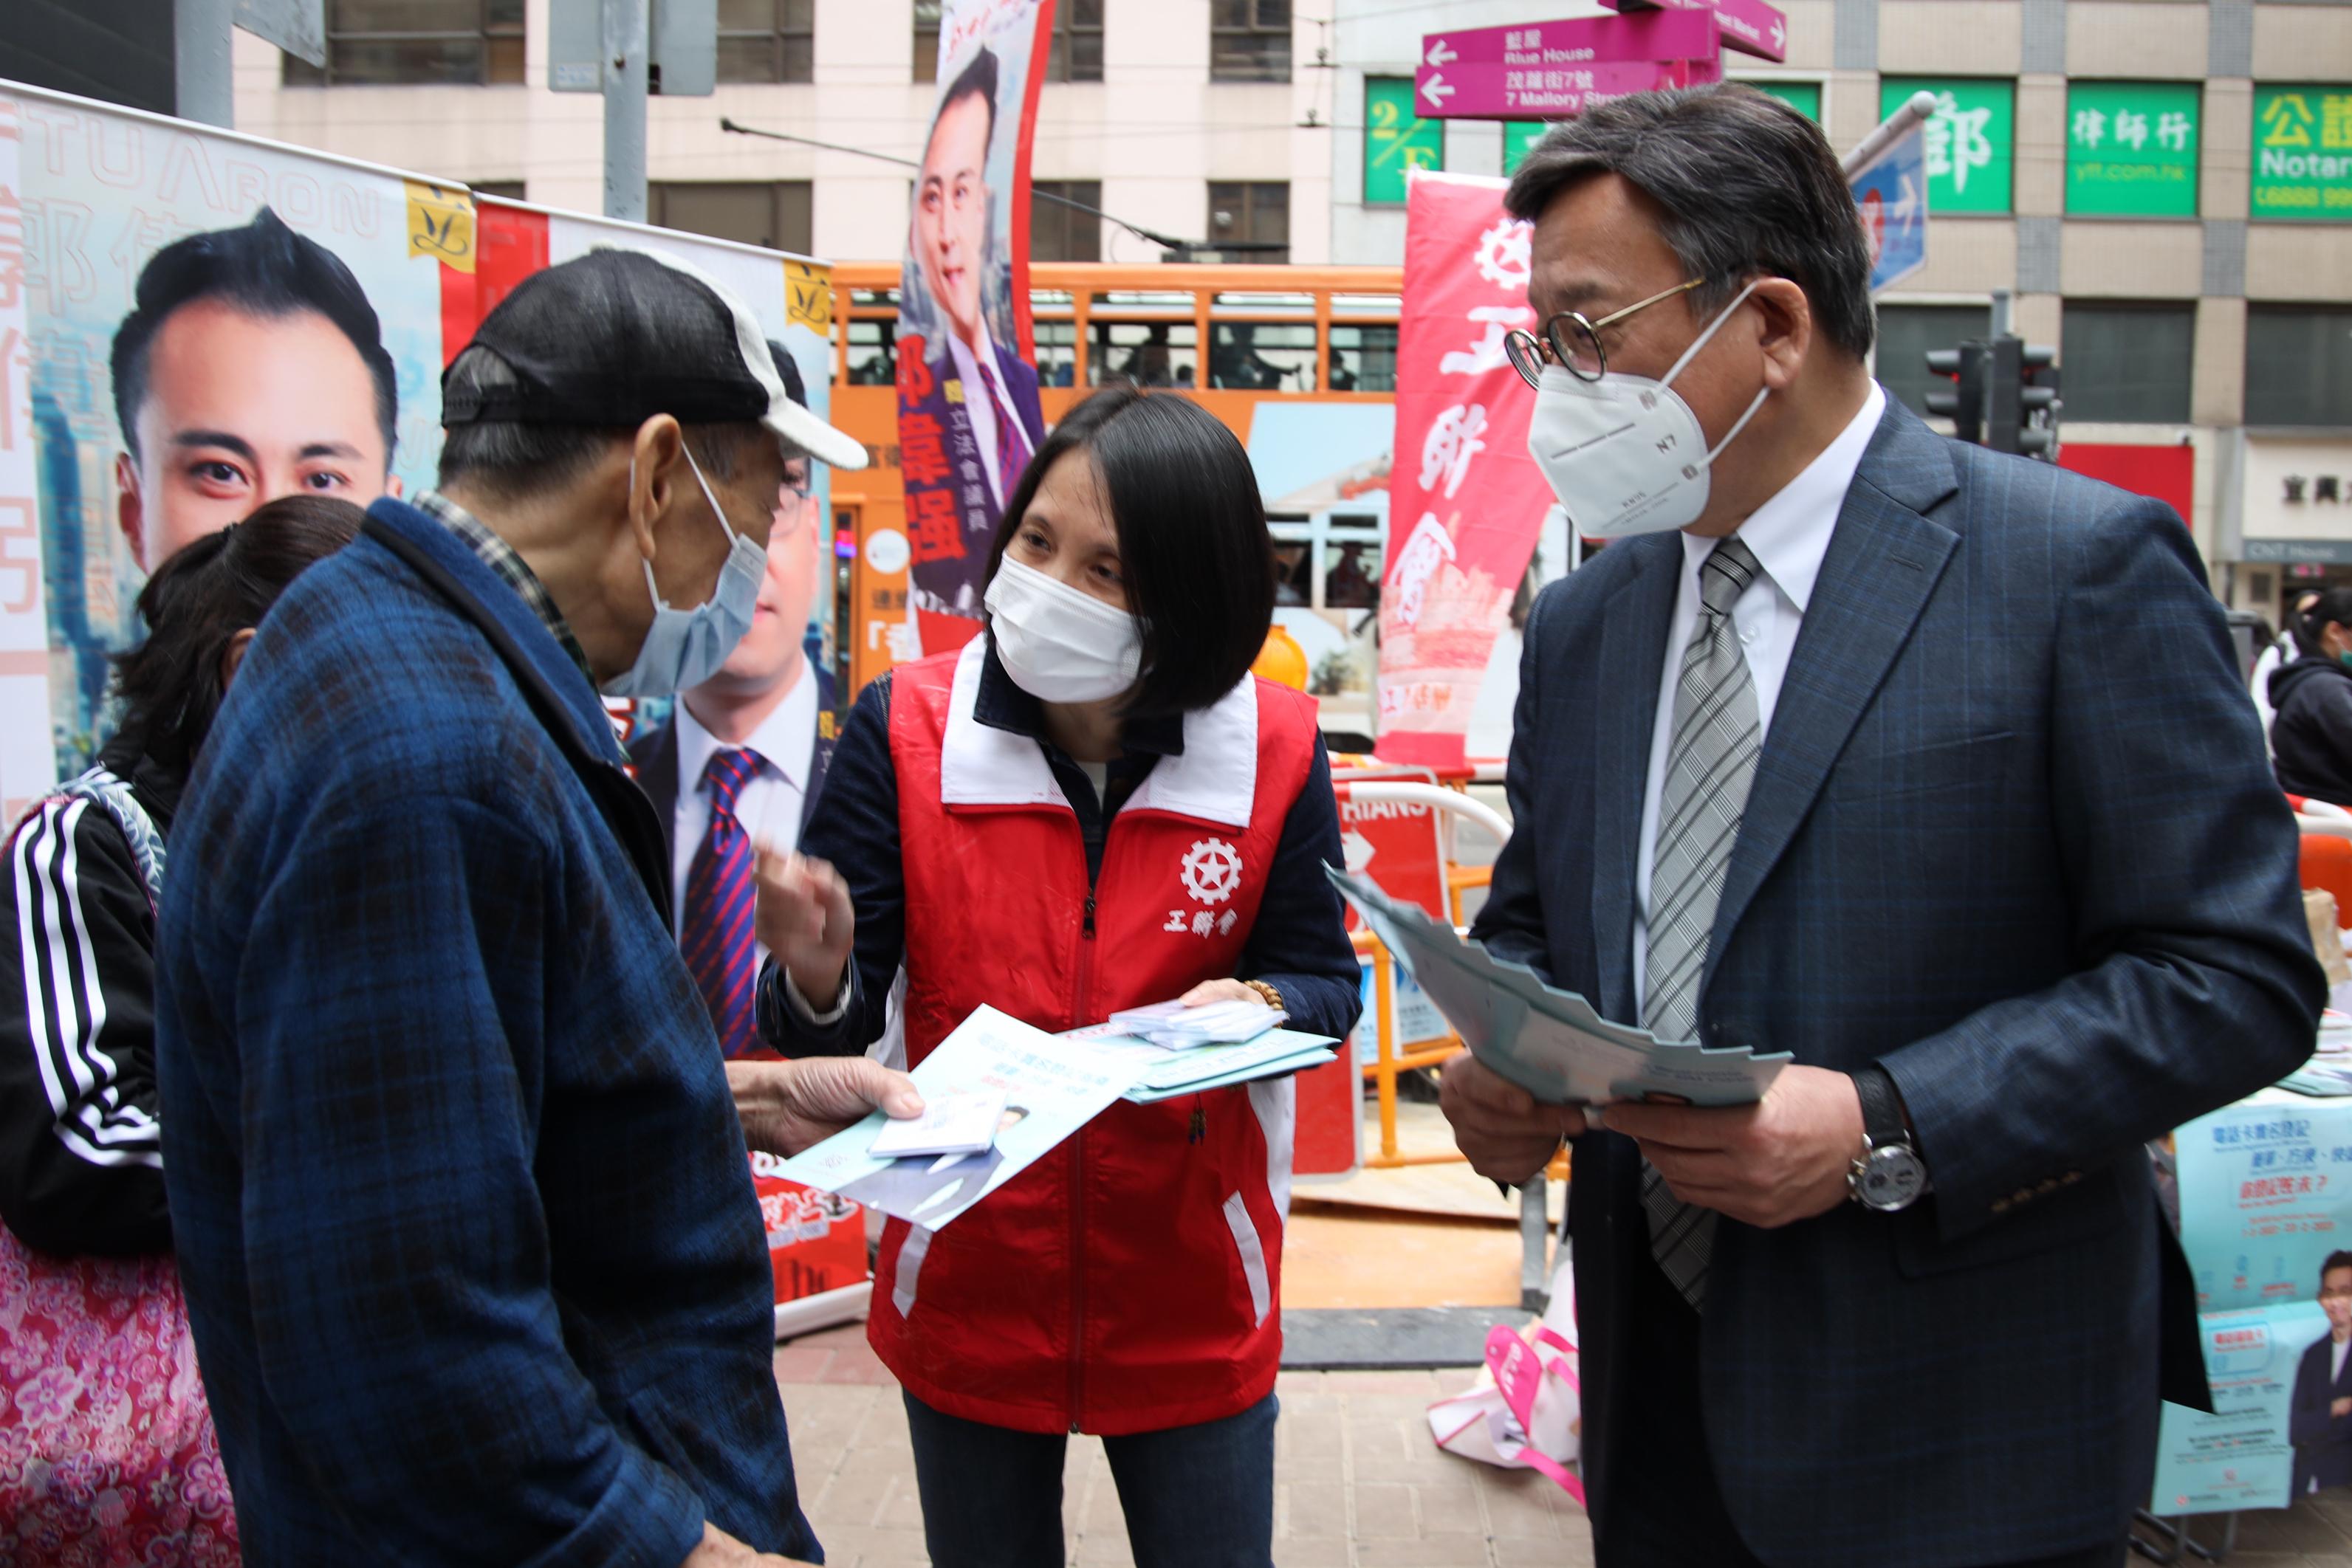 The Secretary for Commerce and Economic Development, Mr Algernon Yau, this afternoon (February 16) visited street counters set up by various district organisations to view their support service for real-name registration for SIM cards. Photo shows Mr Yau (right) distributing promotional items to a member of the public and reminding him to complete the registration before the deadline on February 23.